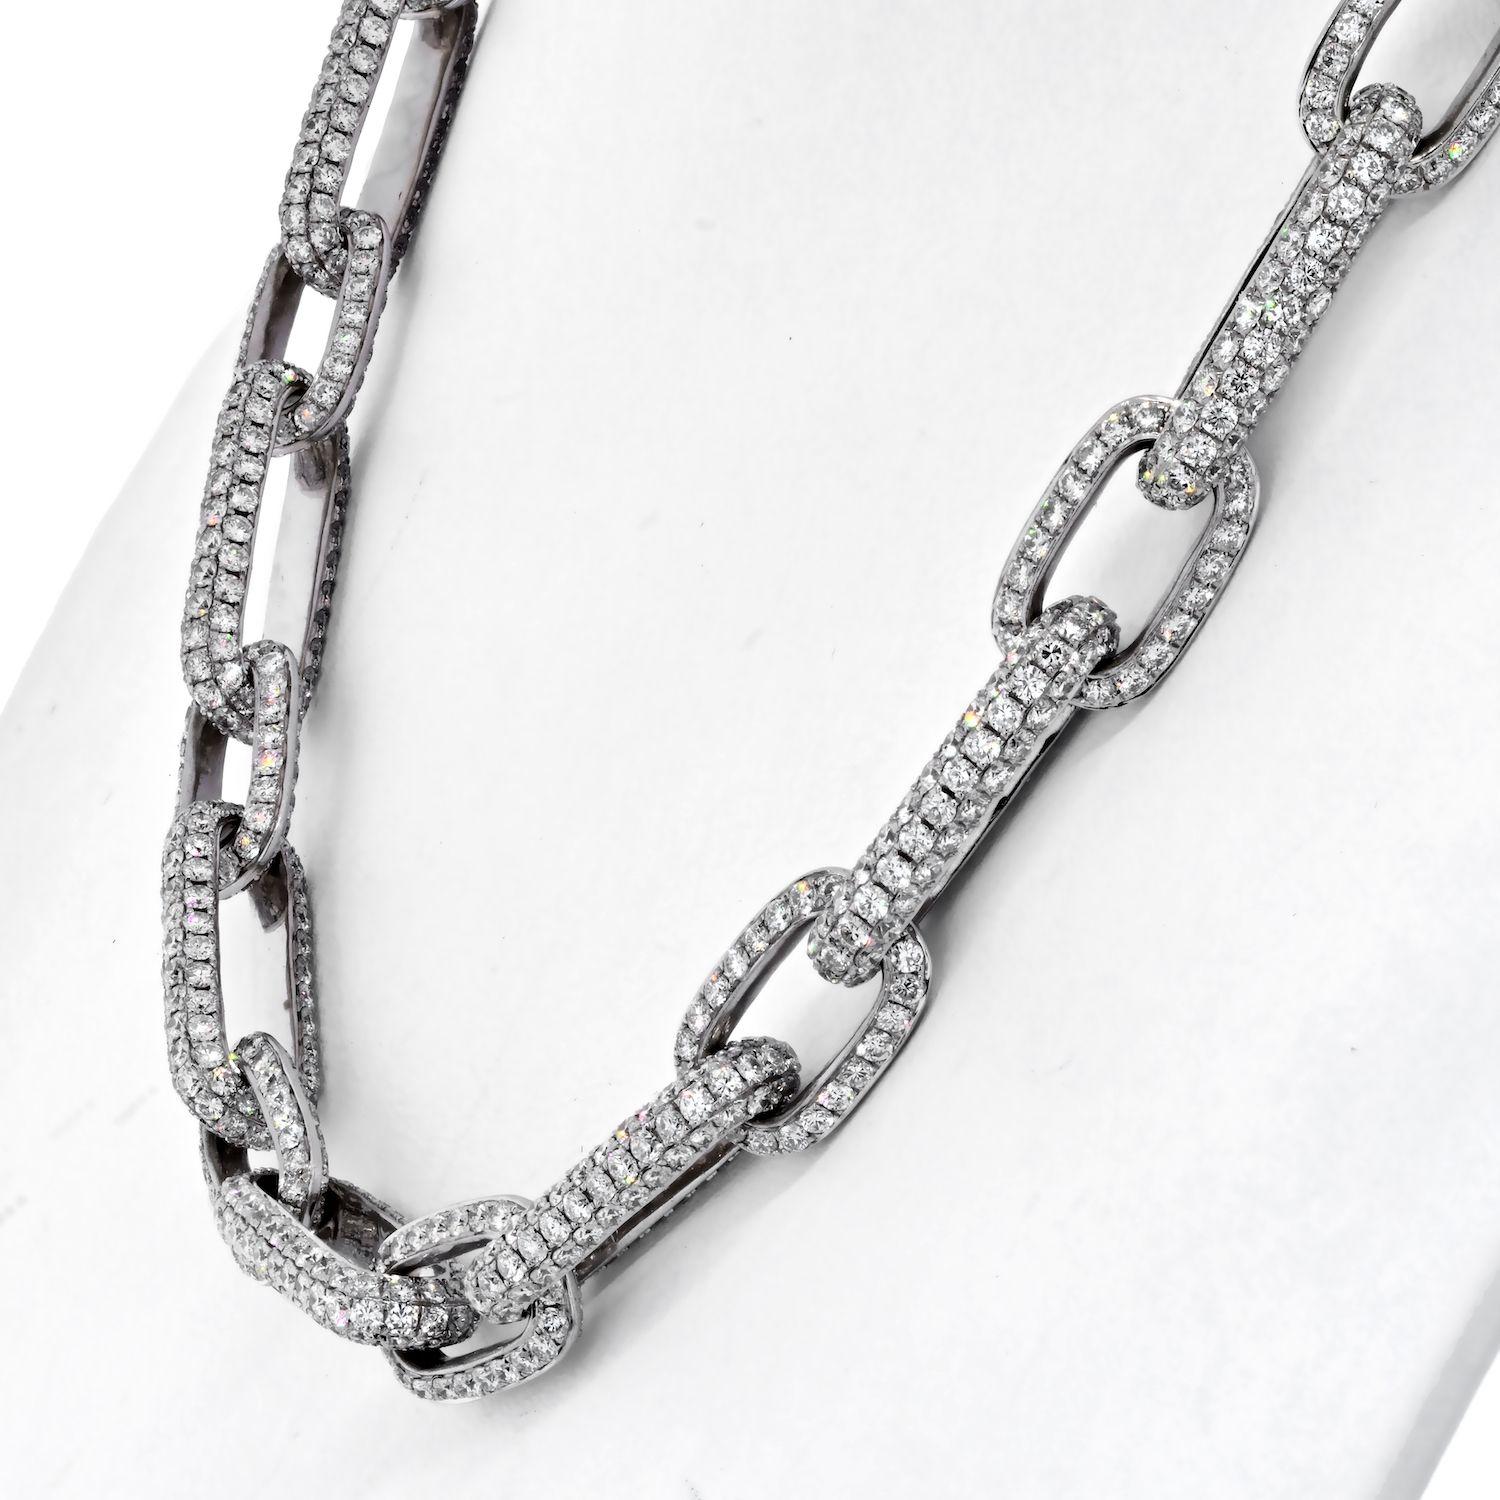 41 Carat 18K White Gold Pave Diamond Link Chain Necklace In Excellent Condition For Sale In New York, NY